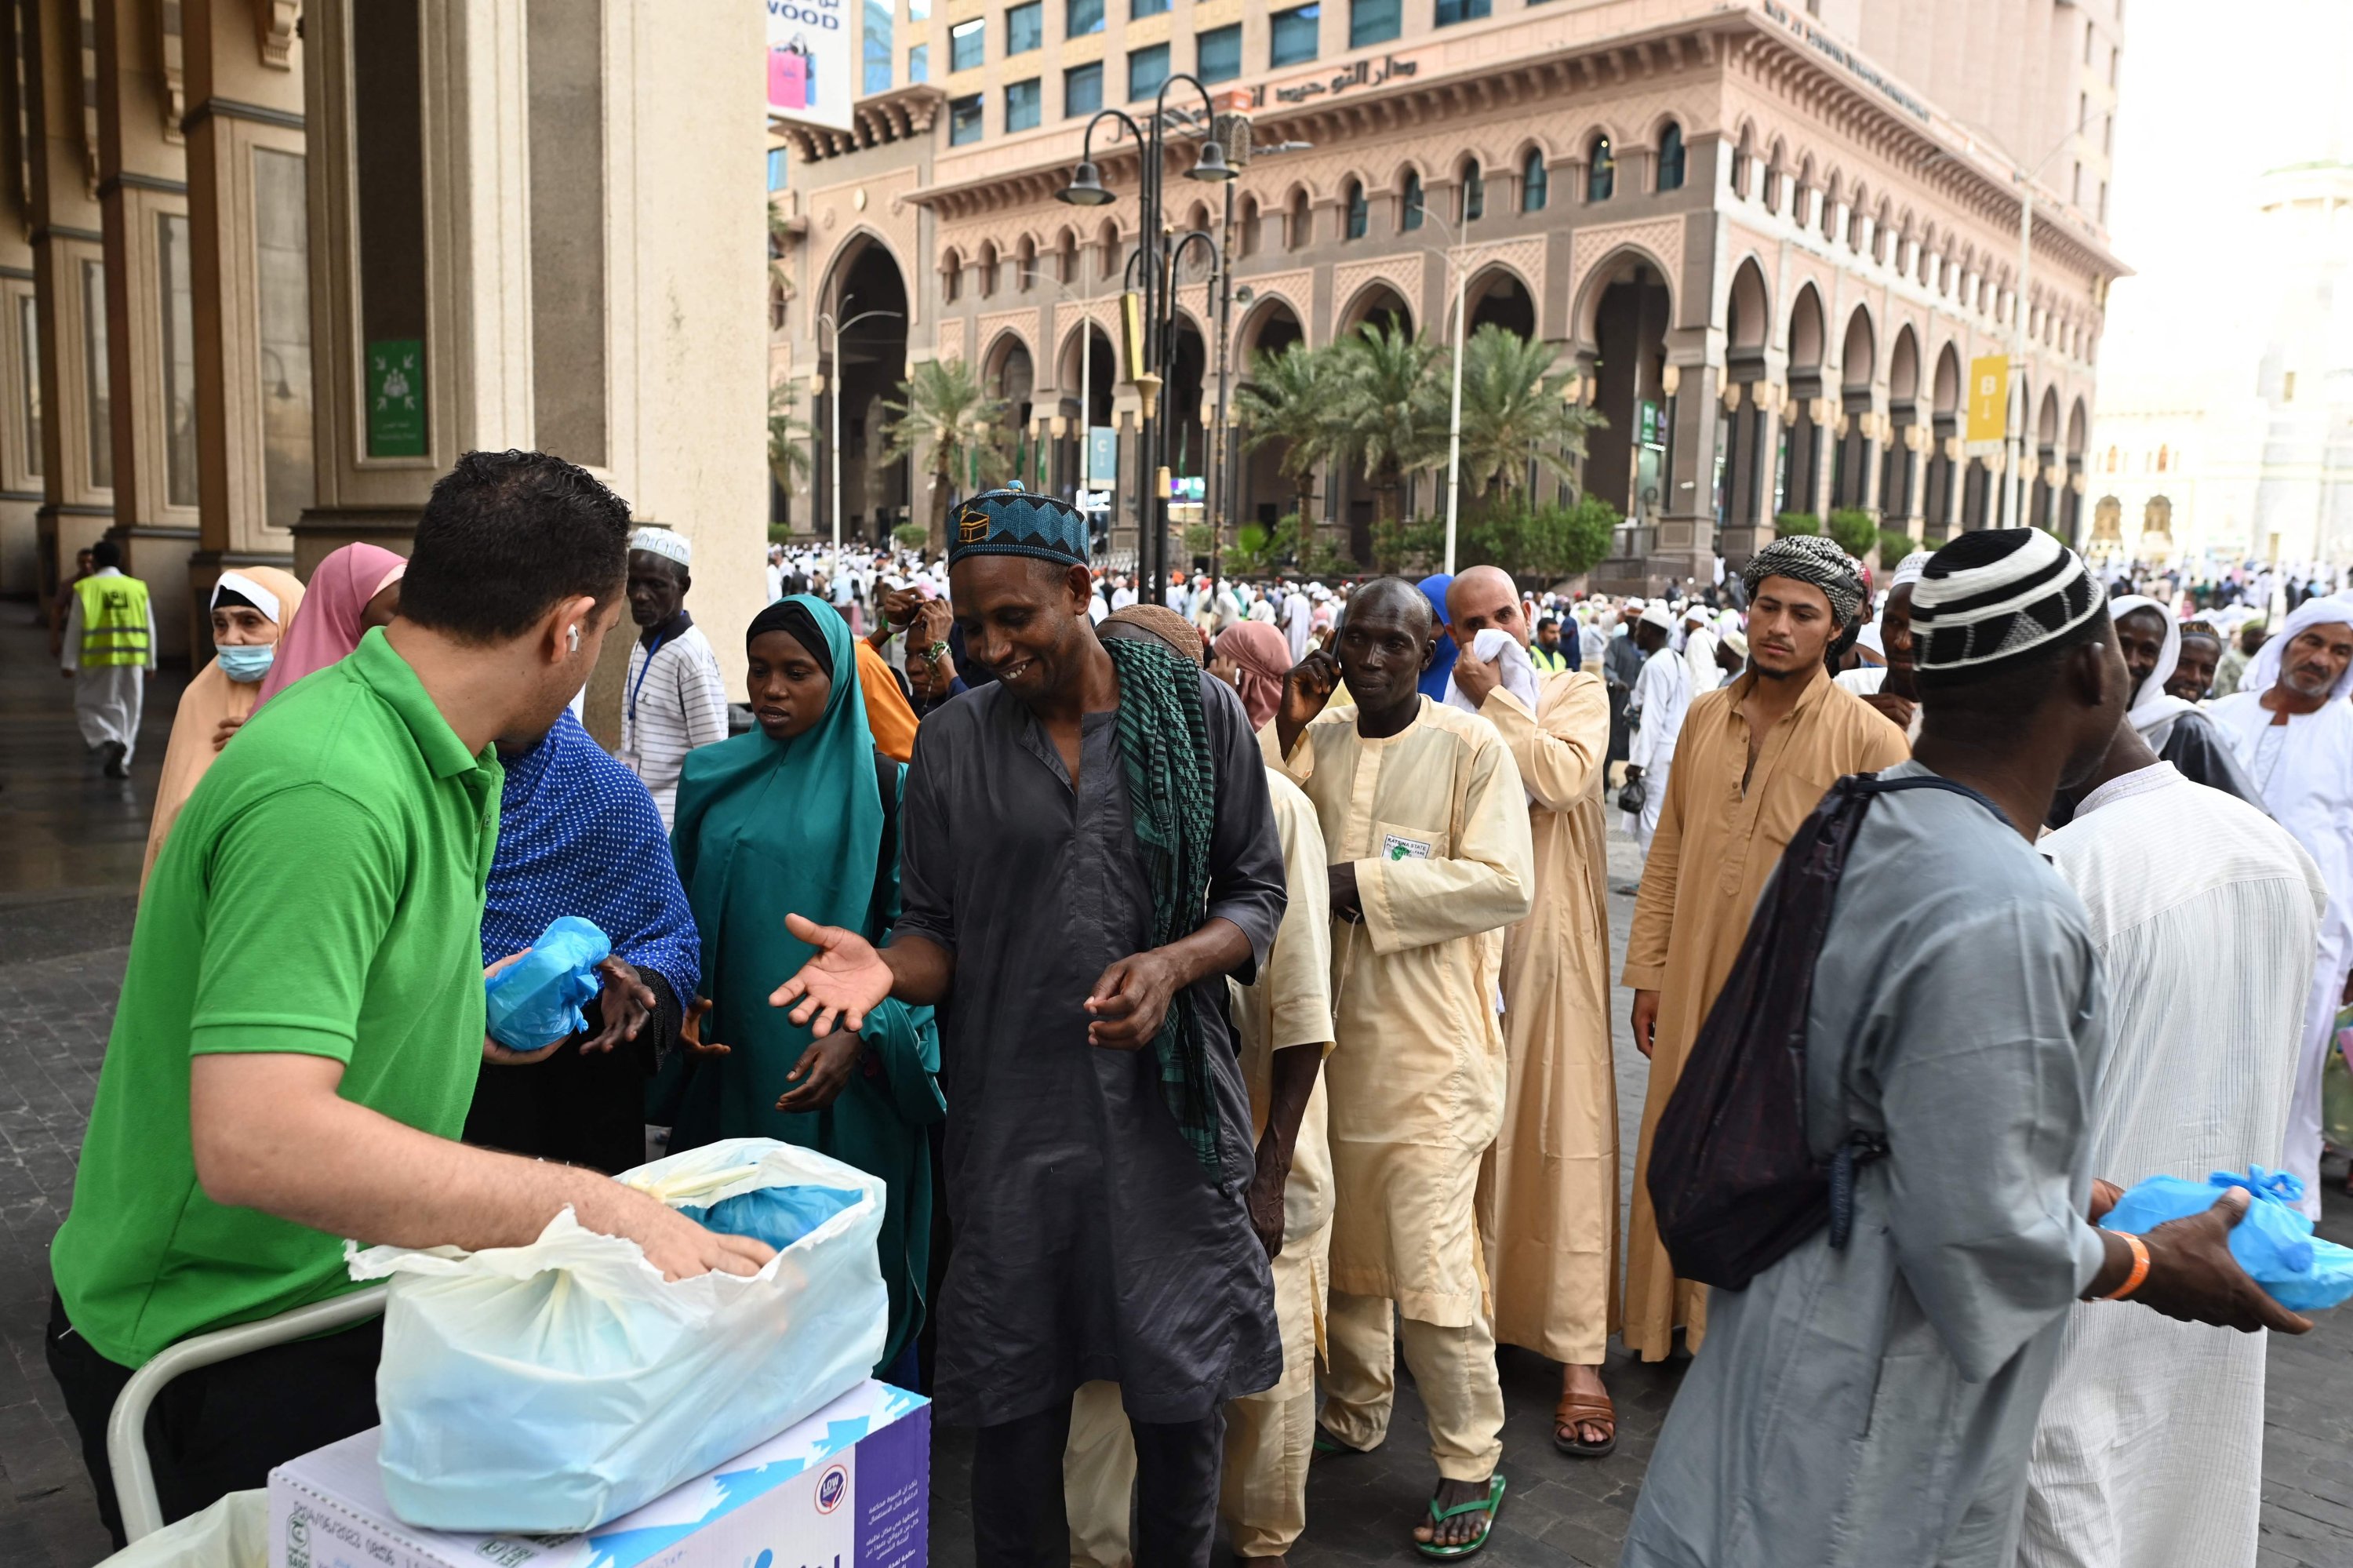 A volunteer hands out food packages offered by the residents of Mecca to pilgrims, Mecca, Saudi Arabia, June 23, 2023. (AFP Photo)